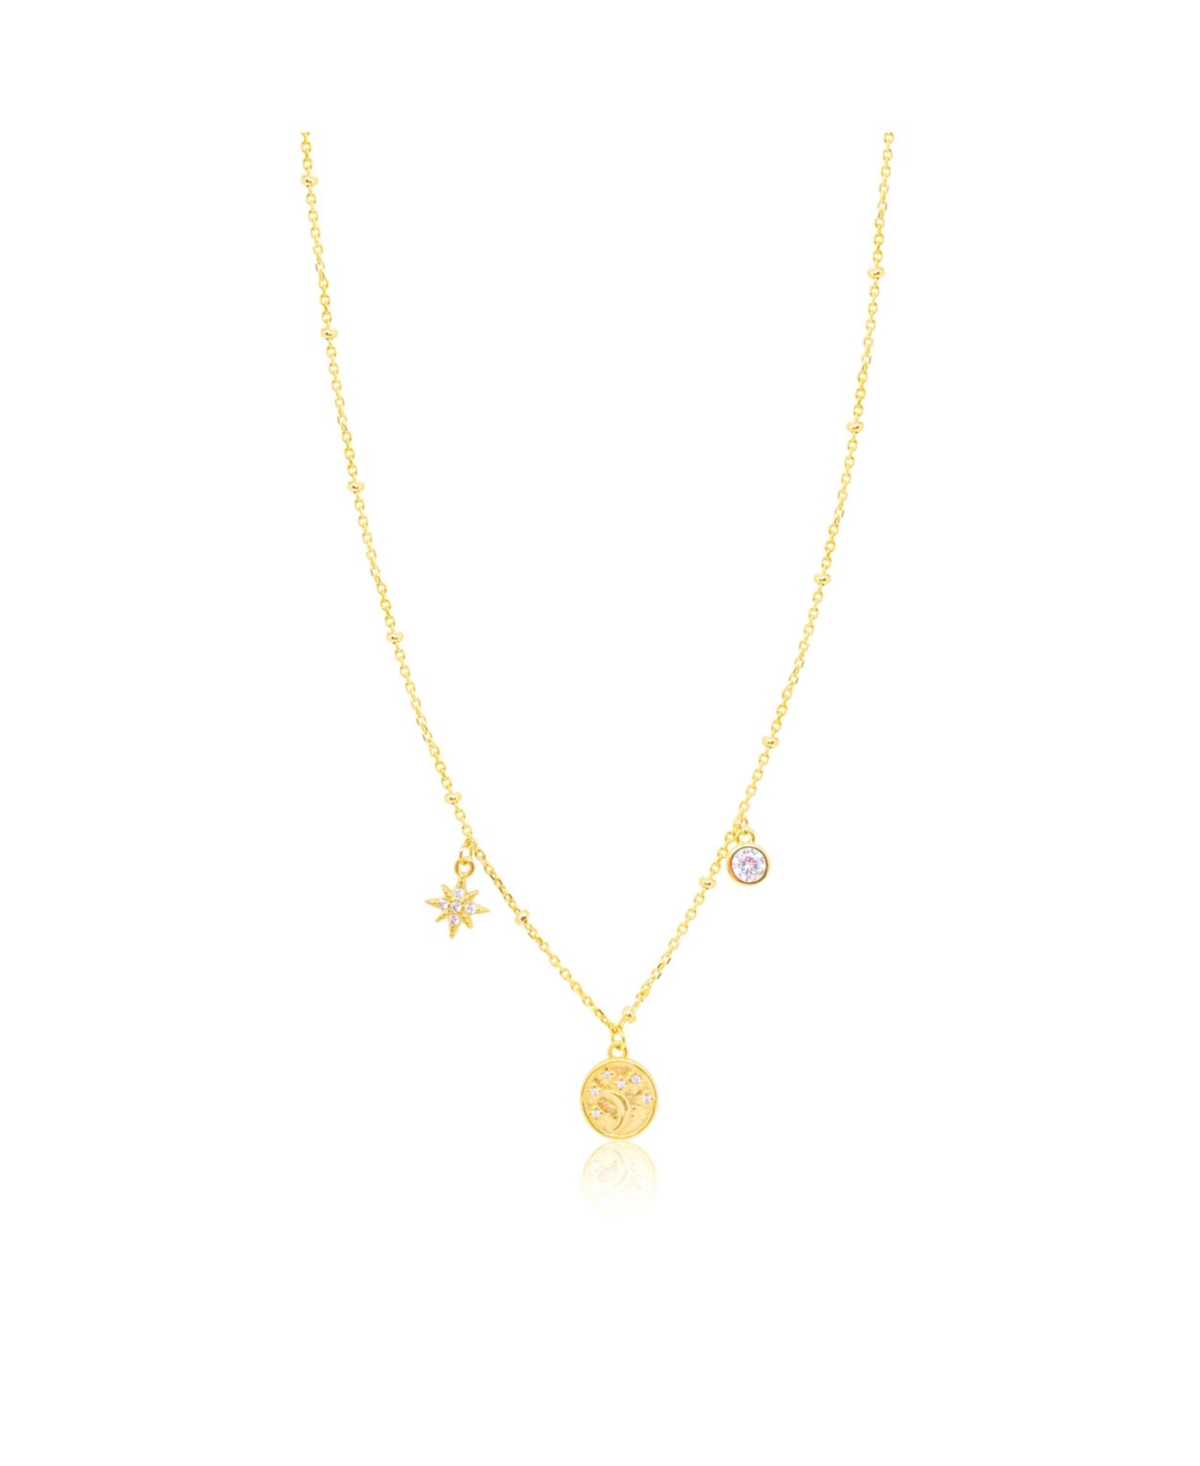 Yellow Gold Tone Cz Moon & Star Charms Necklace - Yellow